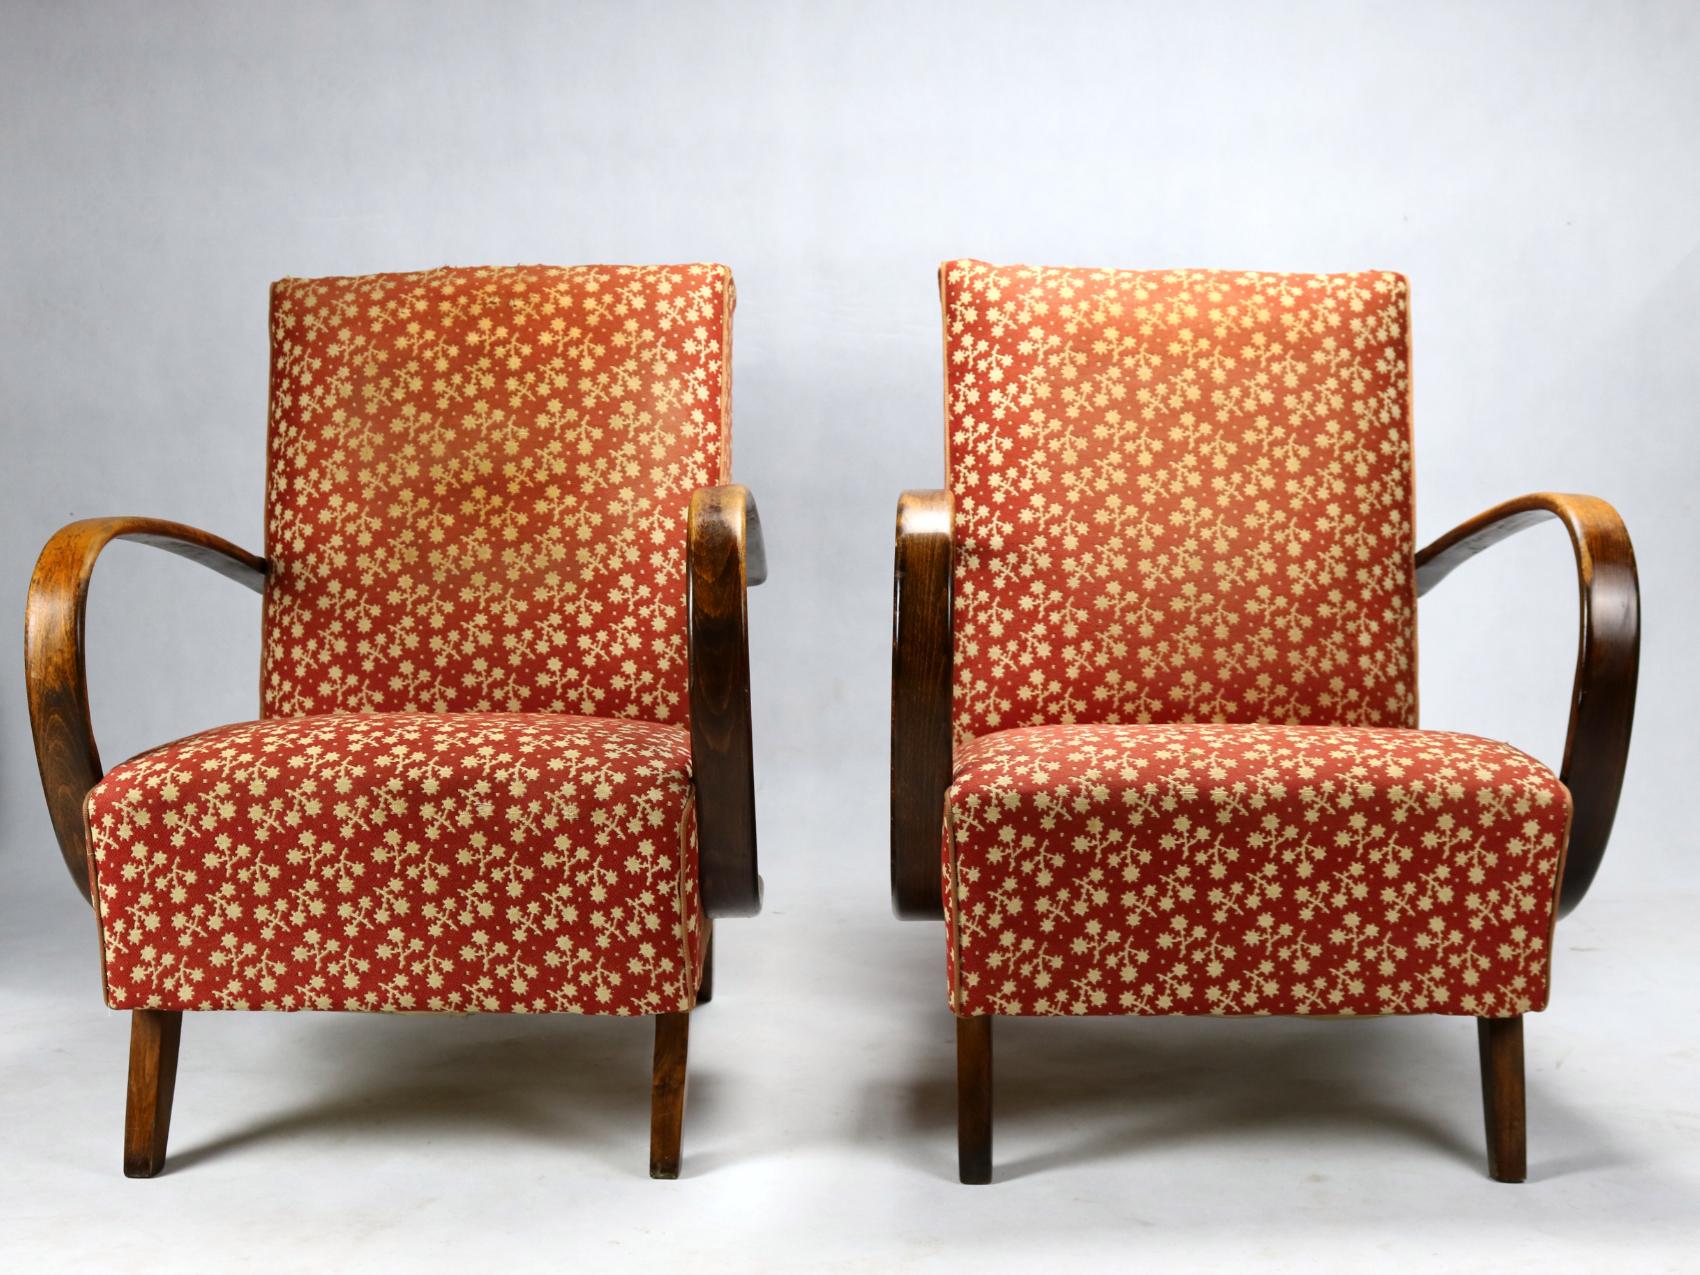 This lounge chairs, model No. 2, were designed by Jindrich Halabala and produced in former Czechoslovakia in the 1930s by UP Zavody Brno. The chairs features curved armrests and legs made from stained beech and are upholstered in original fabric.